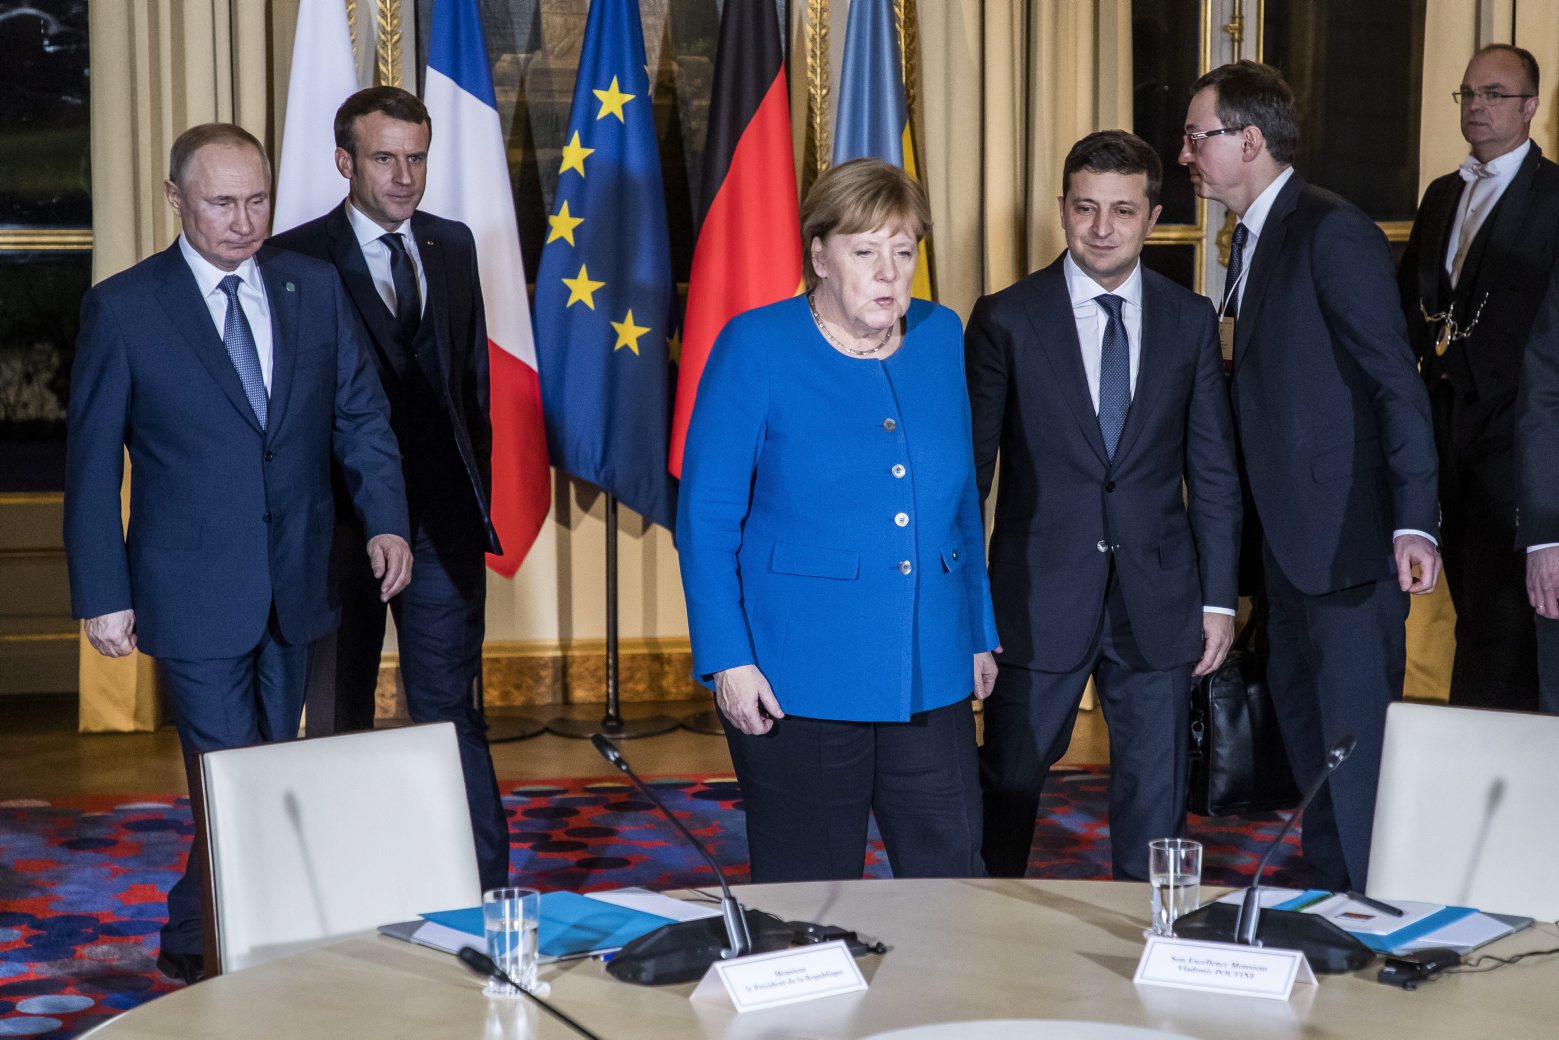 epa08057644 (L-R) Russian President Vladimir Putin, French President Emmanuel Macron, German Chancellor Angela Merkel, Ukrainian President Volodymyr Zelensky attend their summit on Ukraine at Elysee Palace in Paris, France, 09 December 2019. The Normandy format was created in 2014 to resolve the conflict between Kiev and the breakaway republics in Ukraine's east.  EPA/CHRISTOPHE PETIT TESSON / POOL FRANCE NORMANDY FOUR SUMMIT